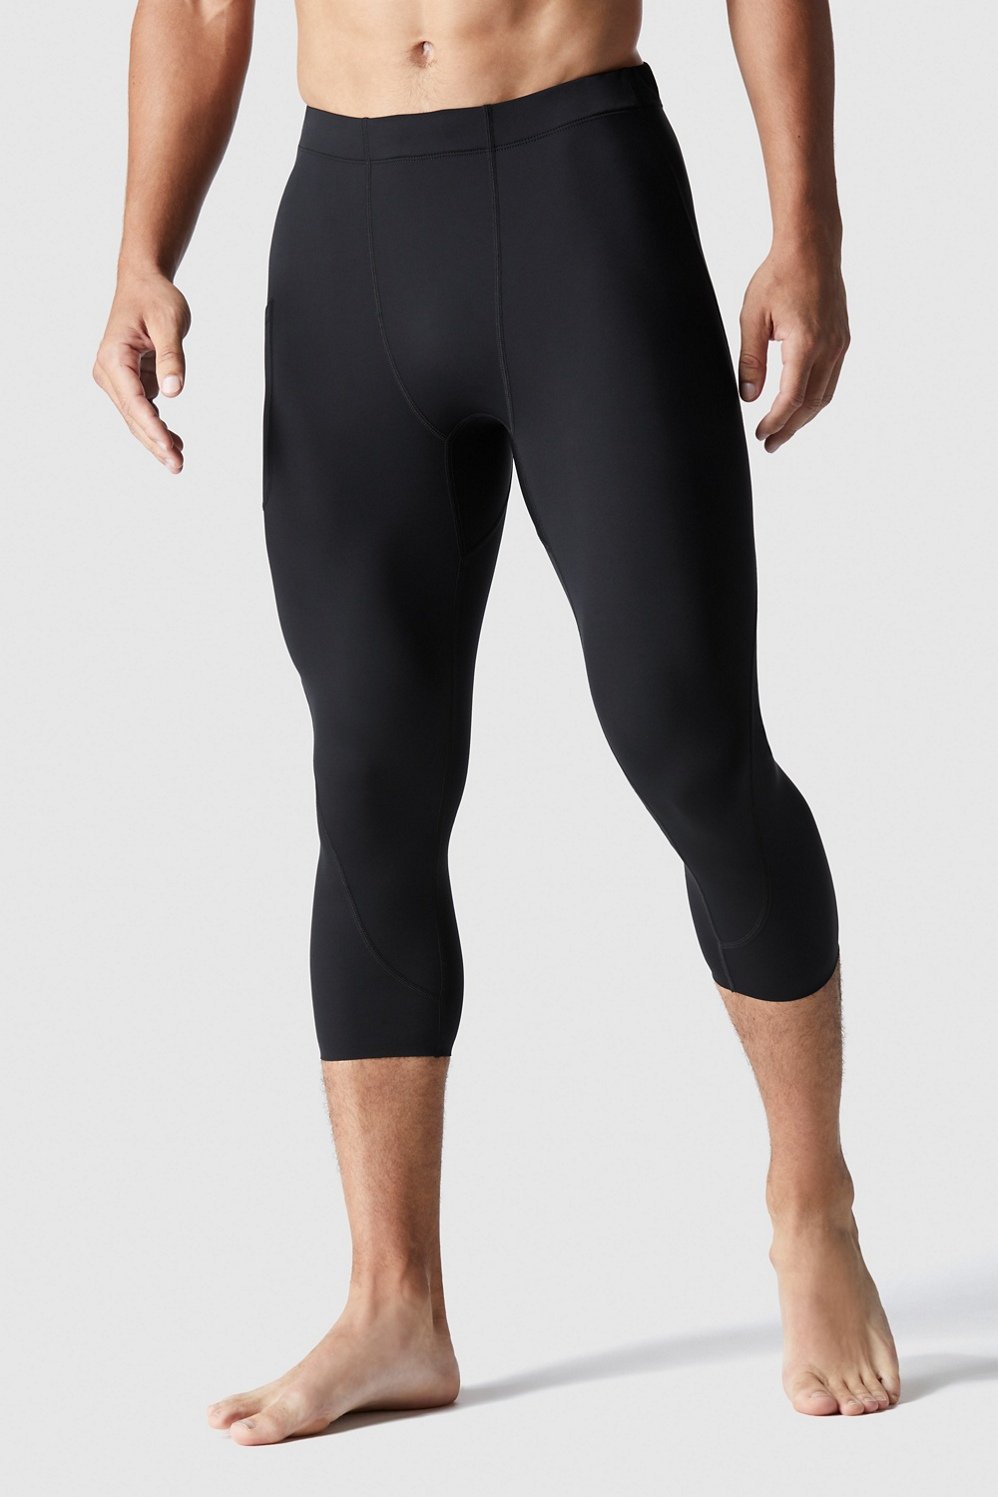 The Baseline Tight 3/4 - Fabletics